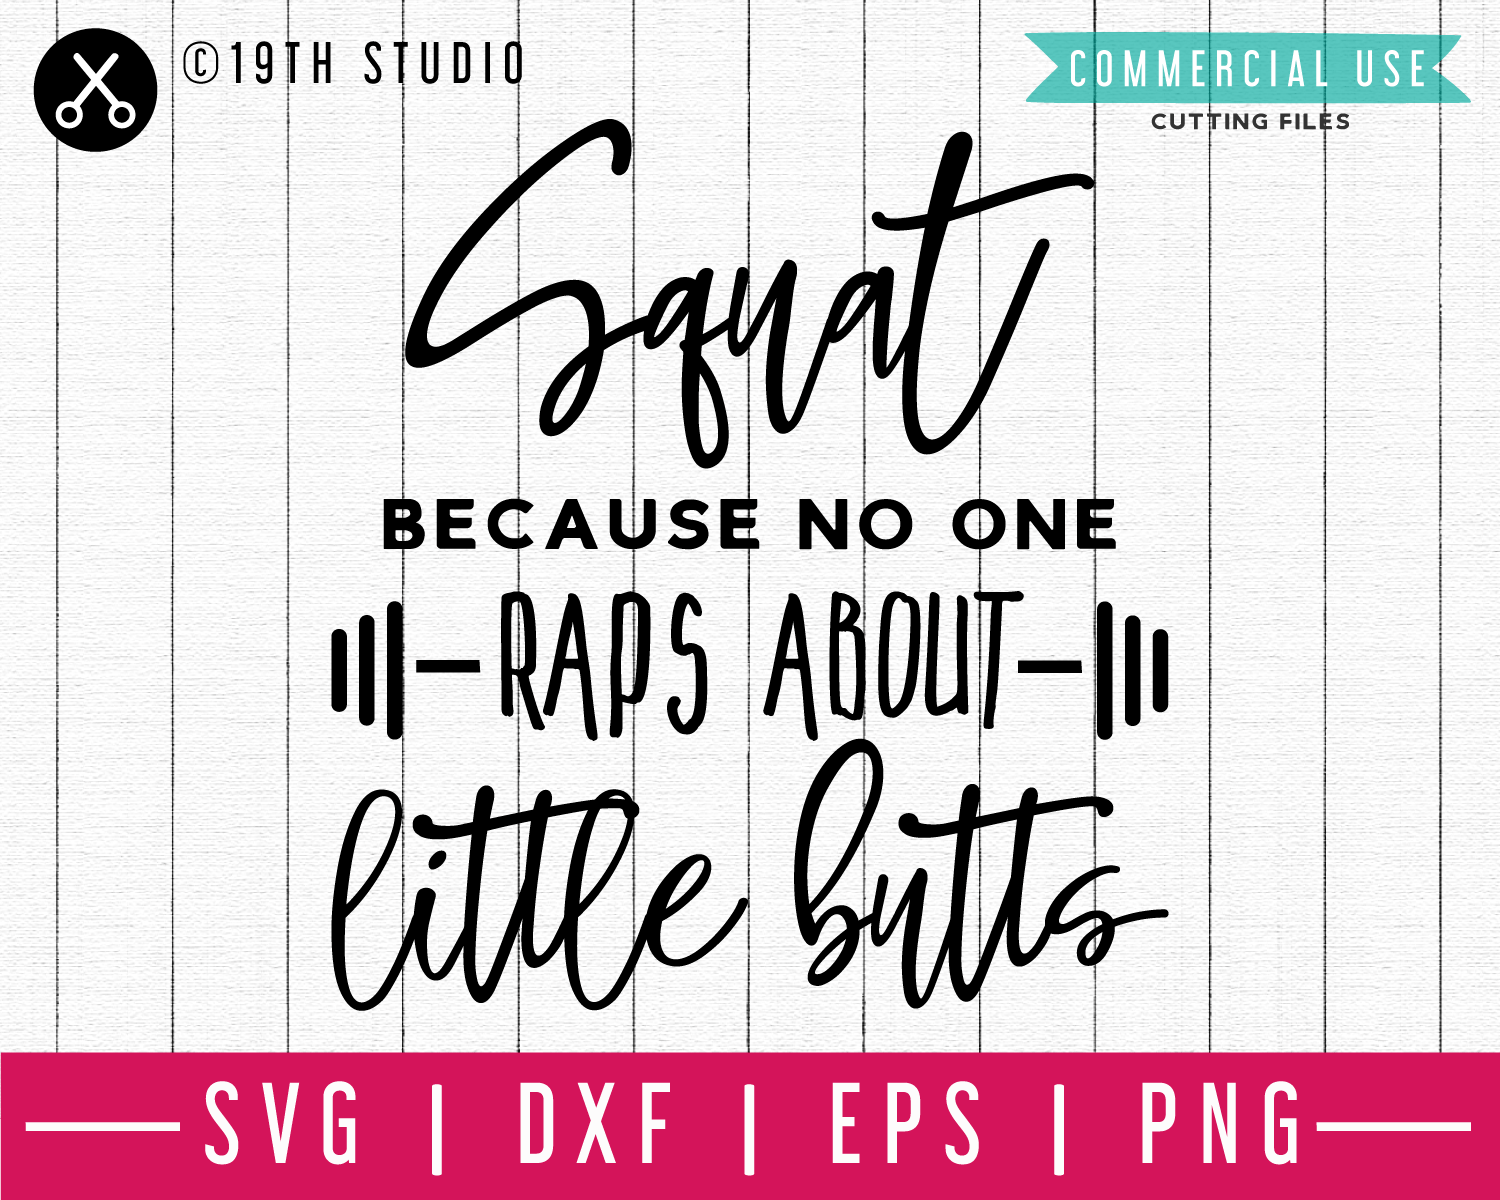 Squat because no one raps about little butts SVG | A Gym SVG | M44F Craft House SVG - SVG files for Cricut and Silhouette